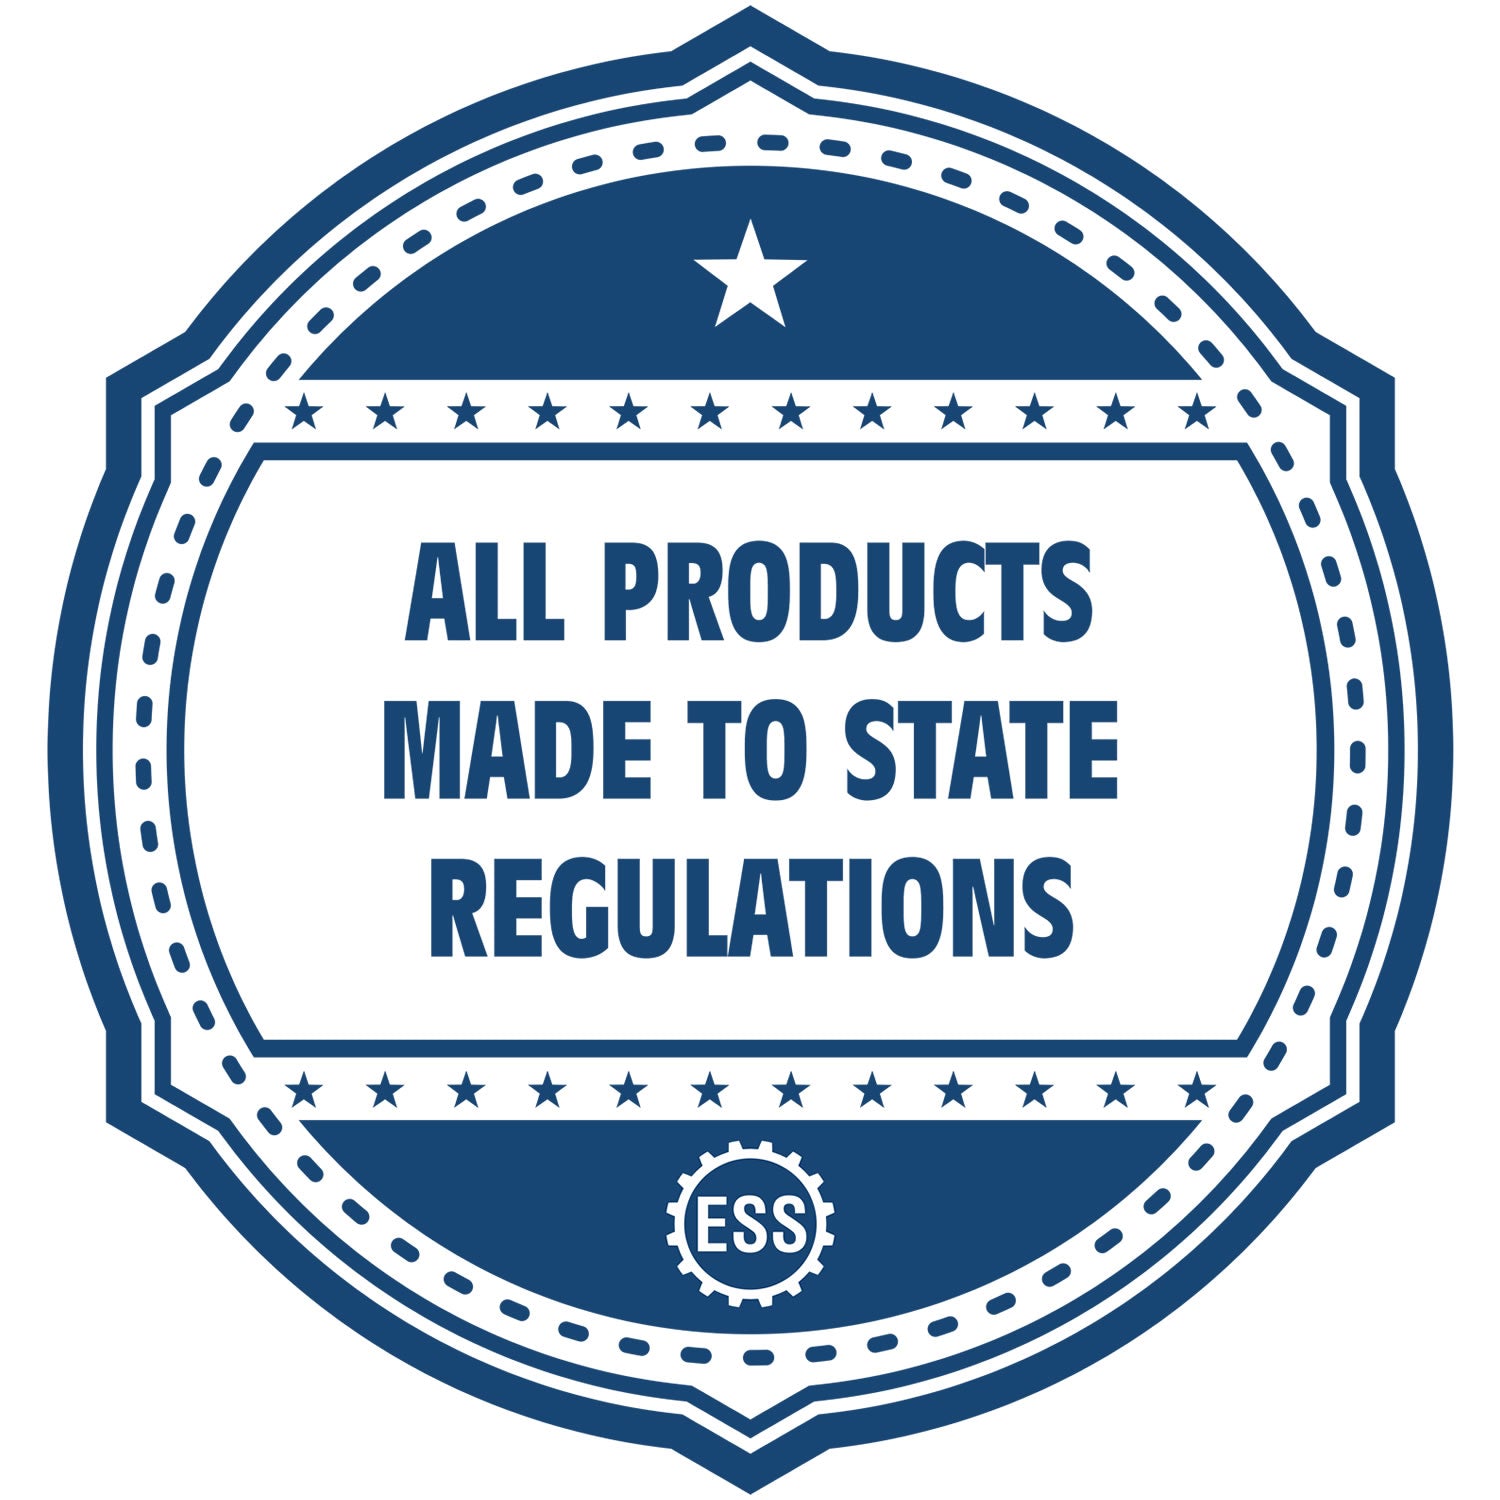 An icon or badge element for the Long Reach Puerto Rico PE Seal showing that this product is made in compliance with state regulations.